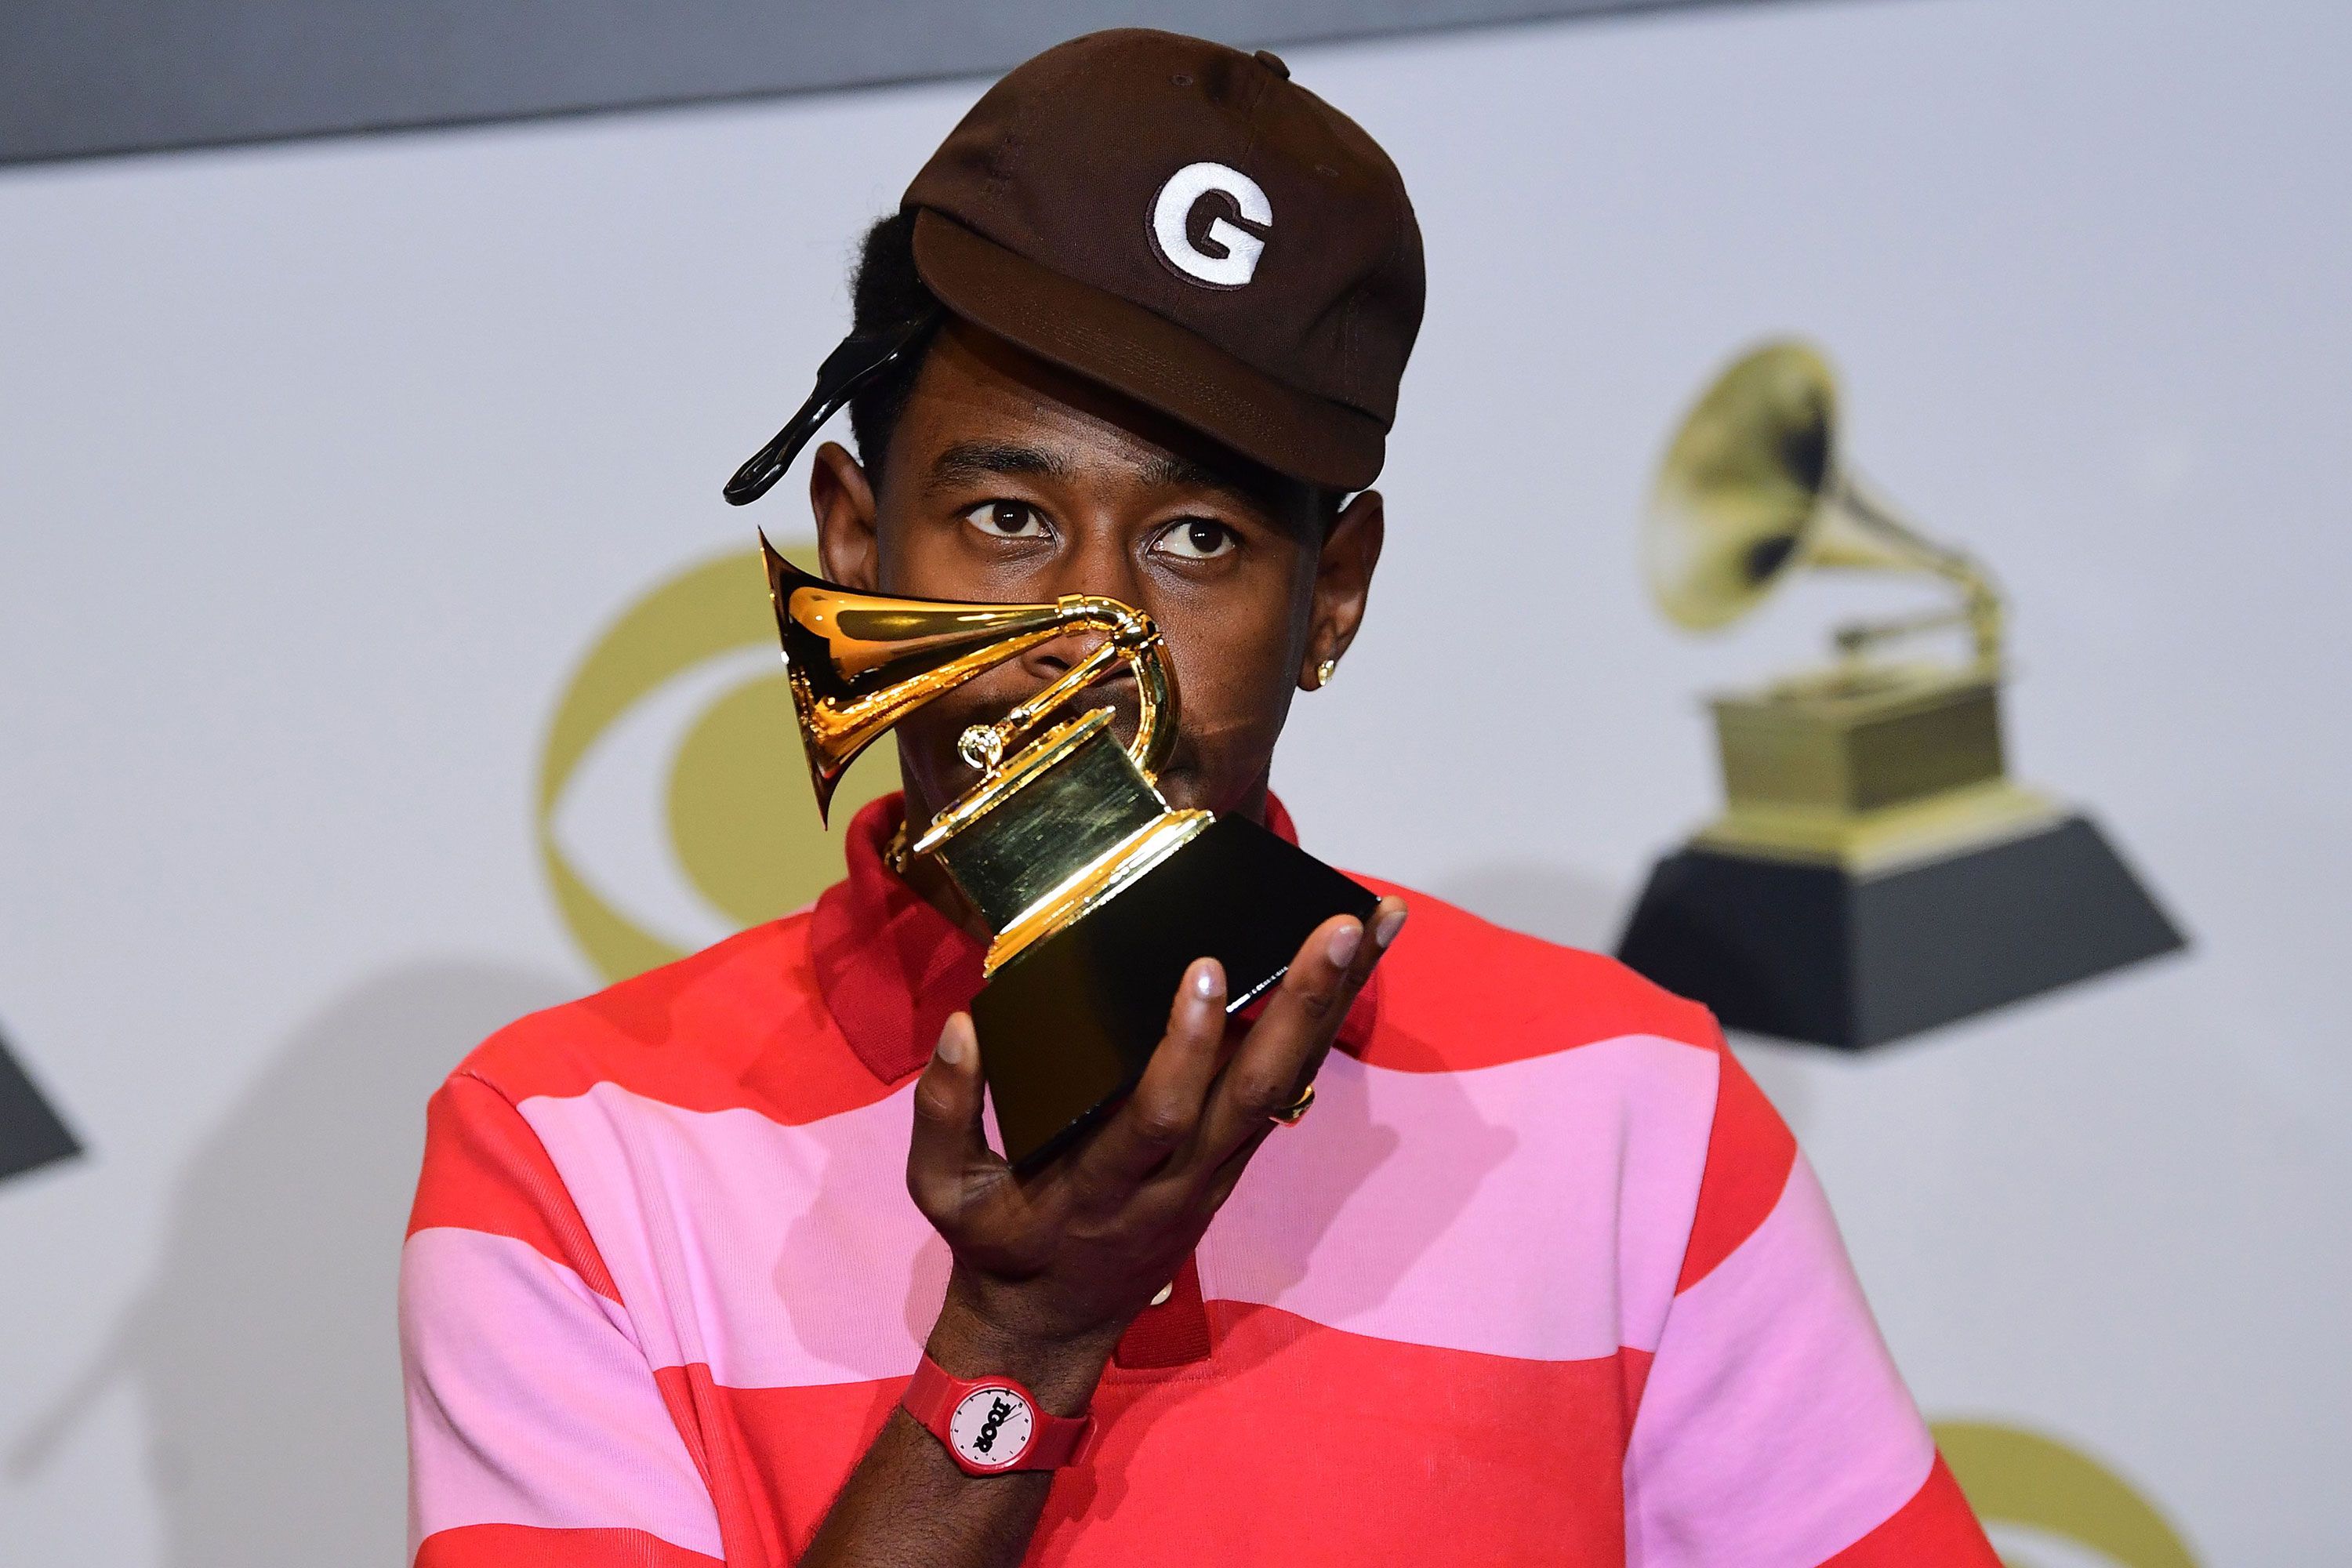 Tyler, The Creator explains why being a rapper is awesome